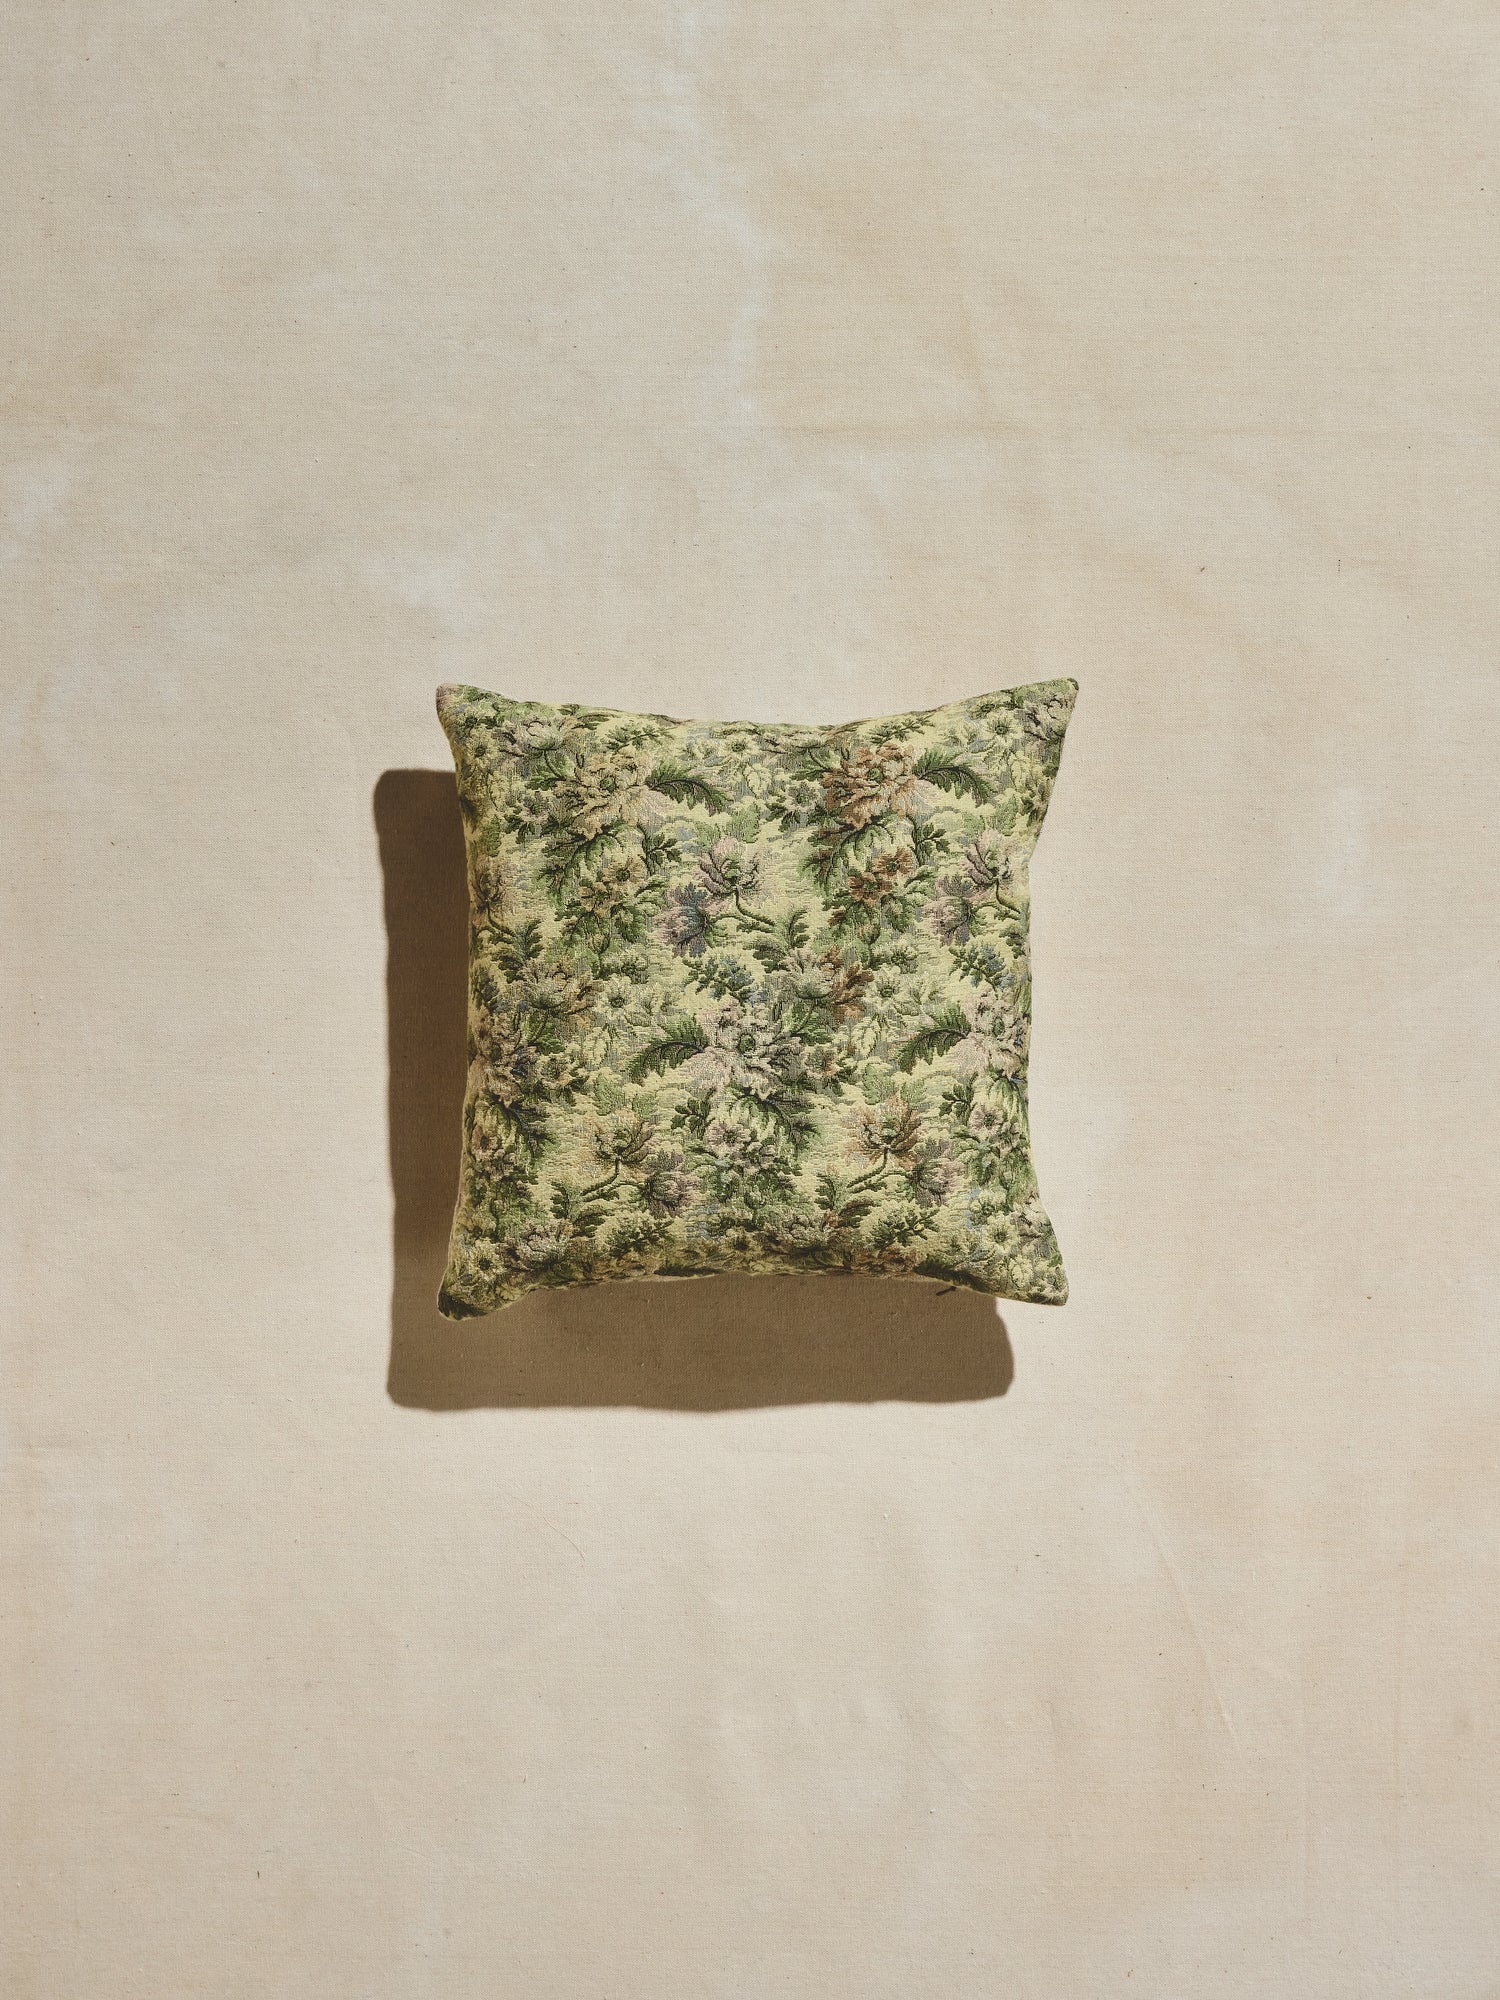 Green floral woven pillow with multi-tonal greens with pastel accents. 